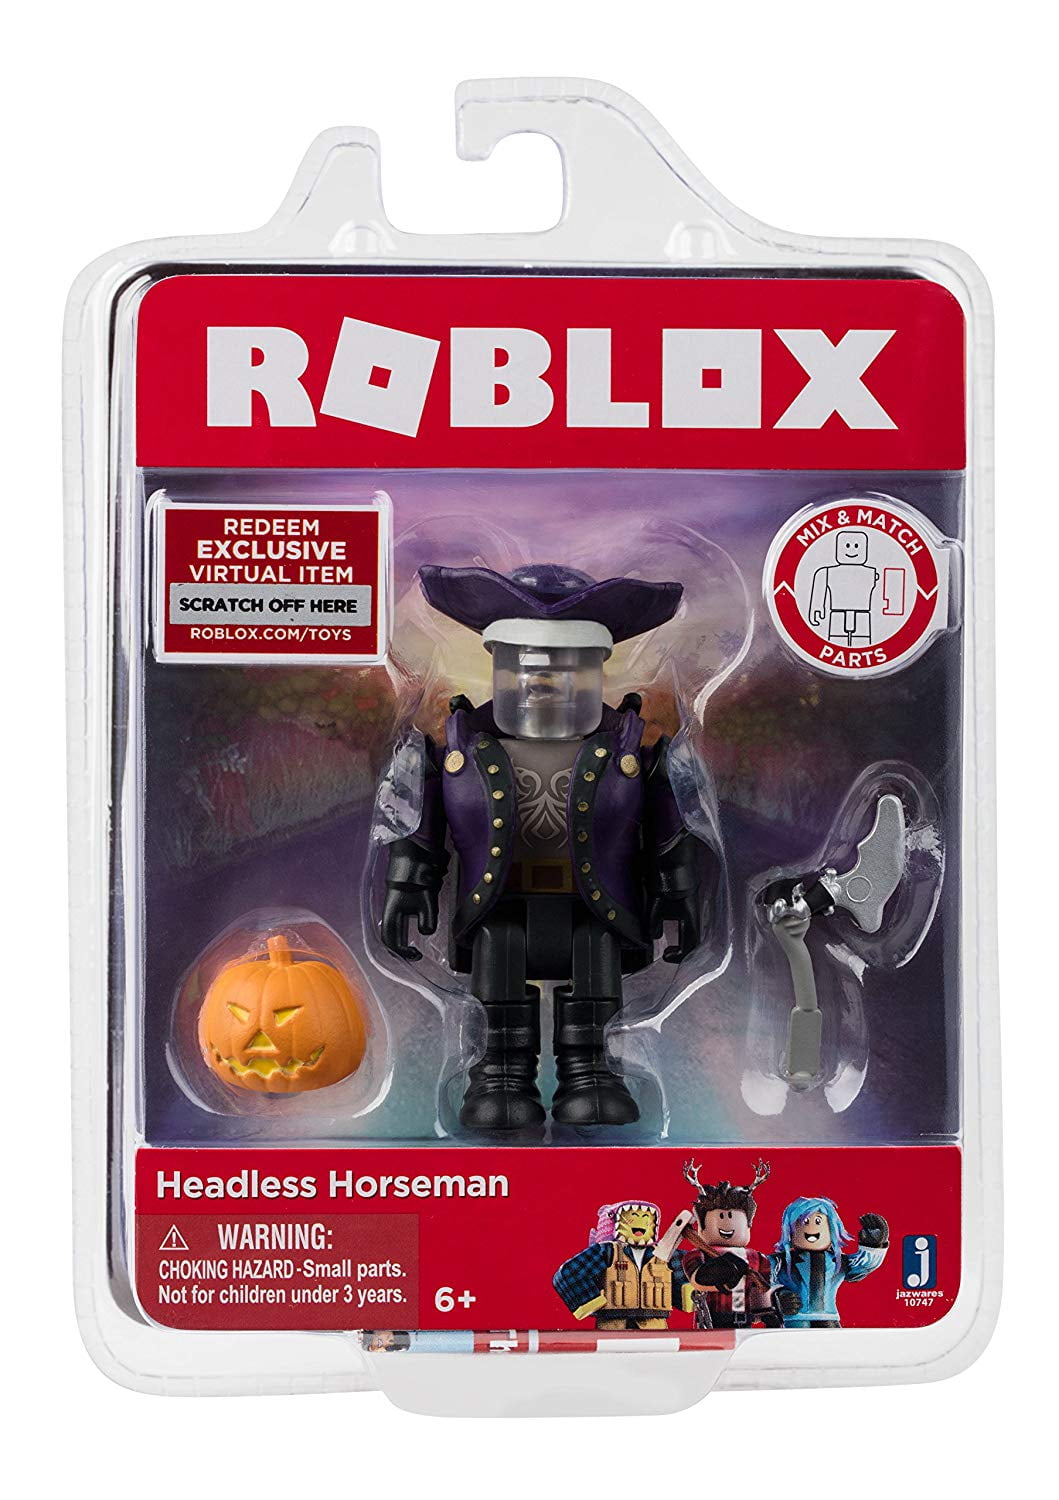 Headless Horseman Figure With Exclusive Virtual Item Game Code Roblox Headless Horseman Figure Packwalmartes With One Figure Accessories And Collector S Checklist By Roblox Walmart Com Walmart Com - roblox toys redeem code big head